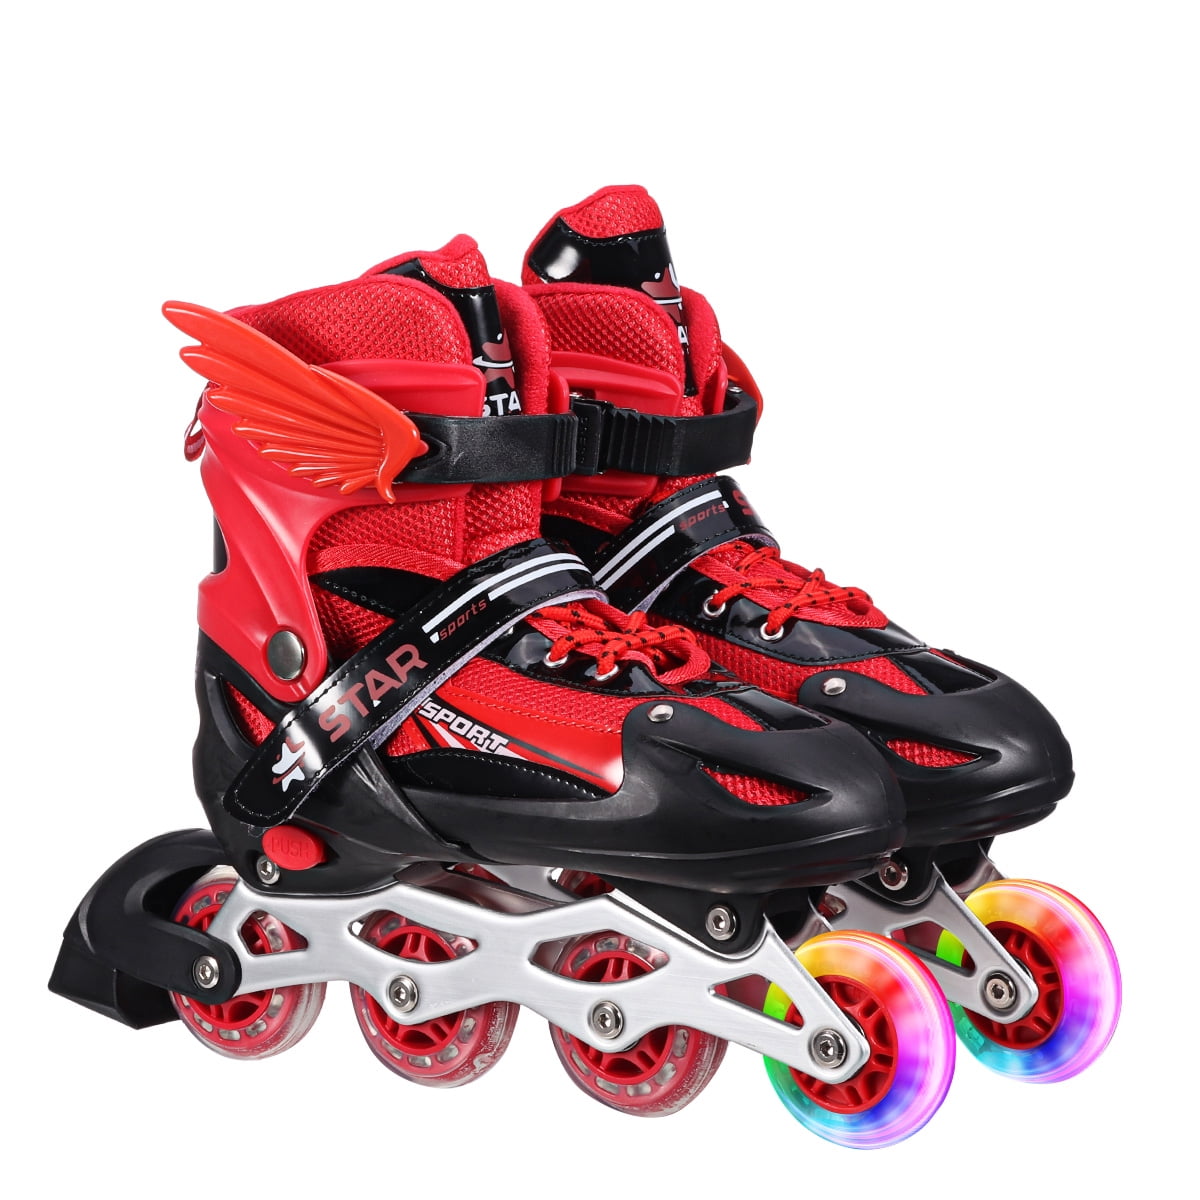 SHAREWIN Inline Skates with Full Light up Wheels,Black,Size 10-12US 